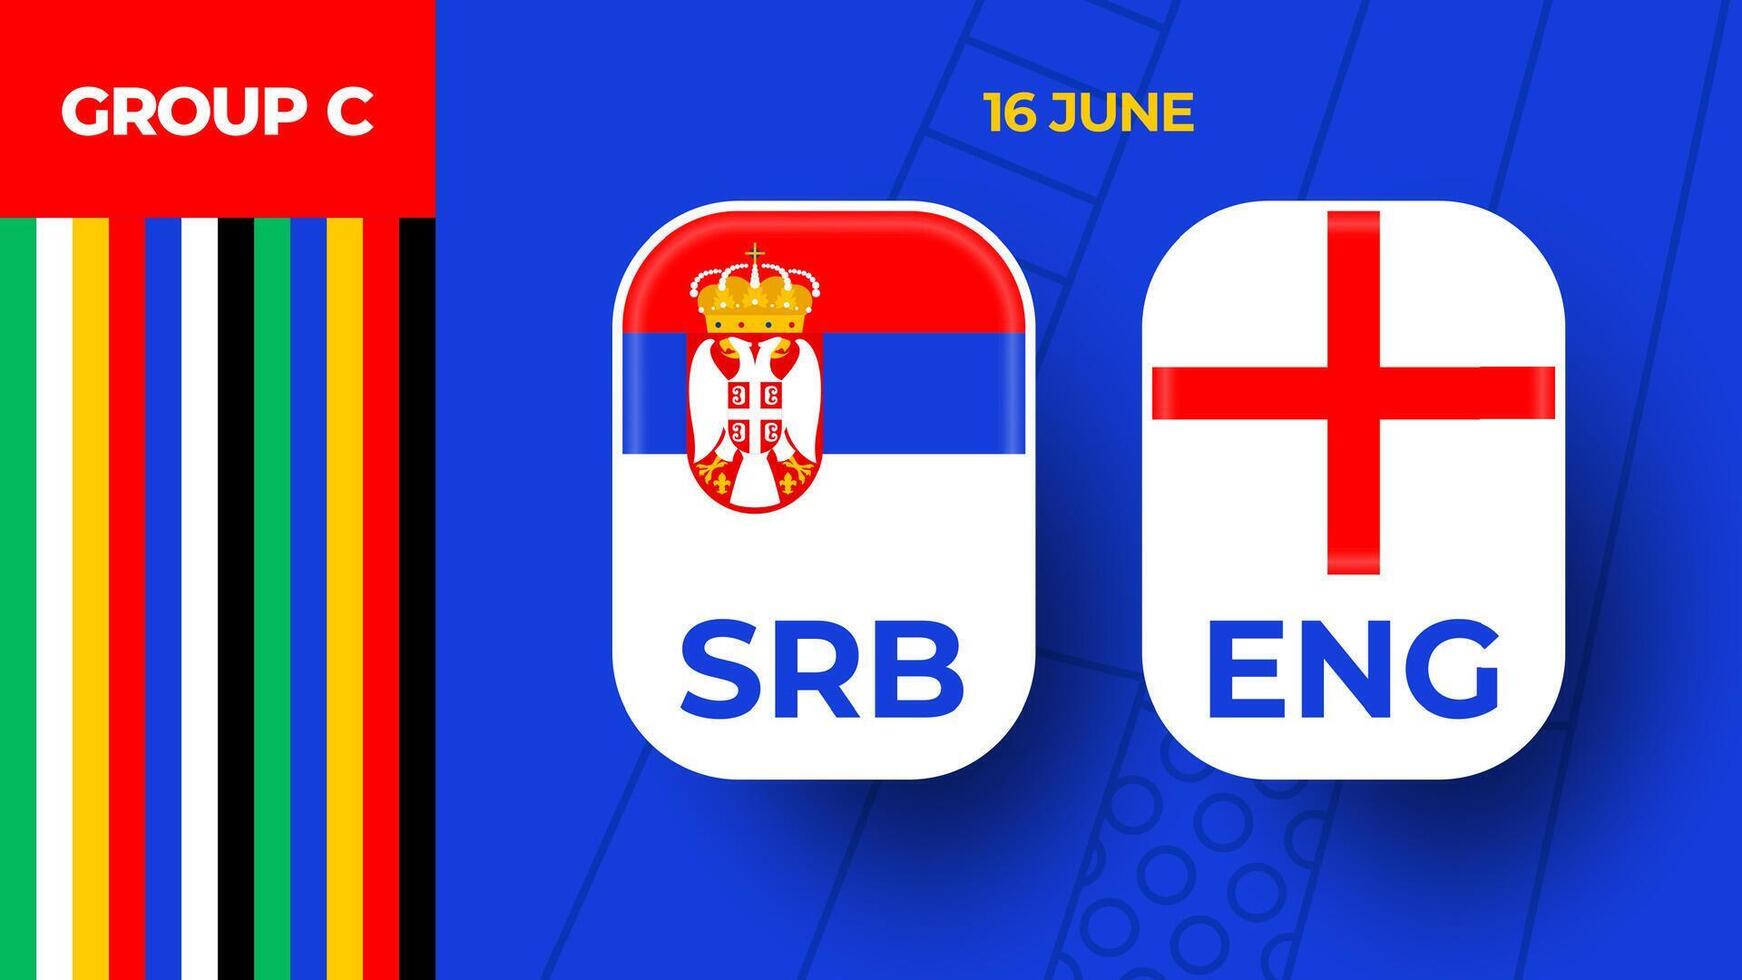 Serbia vs england football 2024 match versus. 2024 group stage championship match versus teams intro sport background, championship competition vector